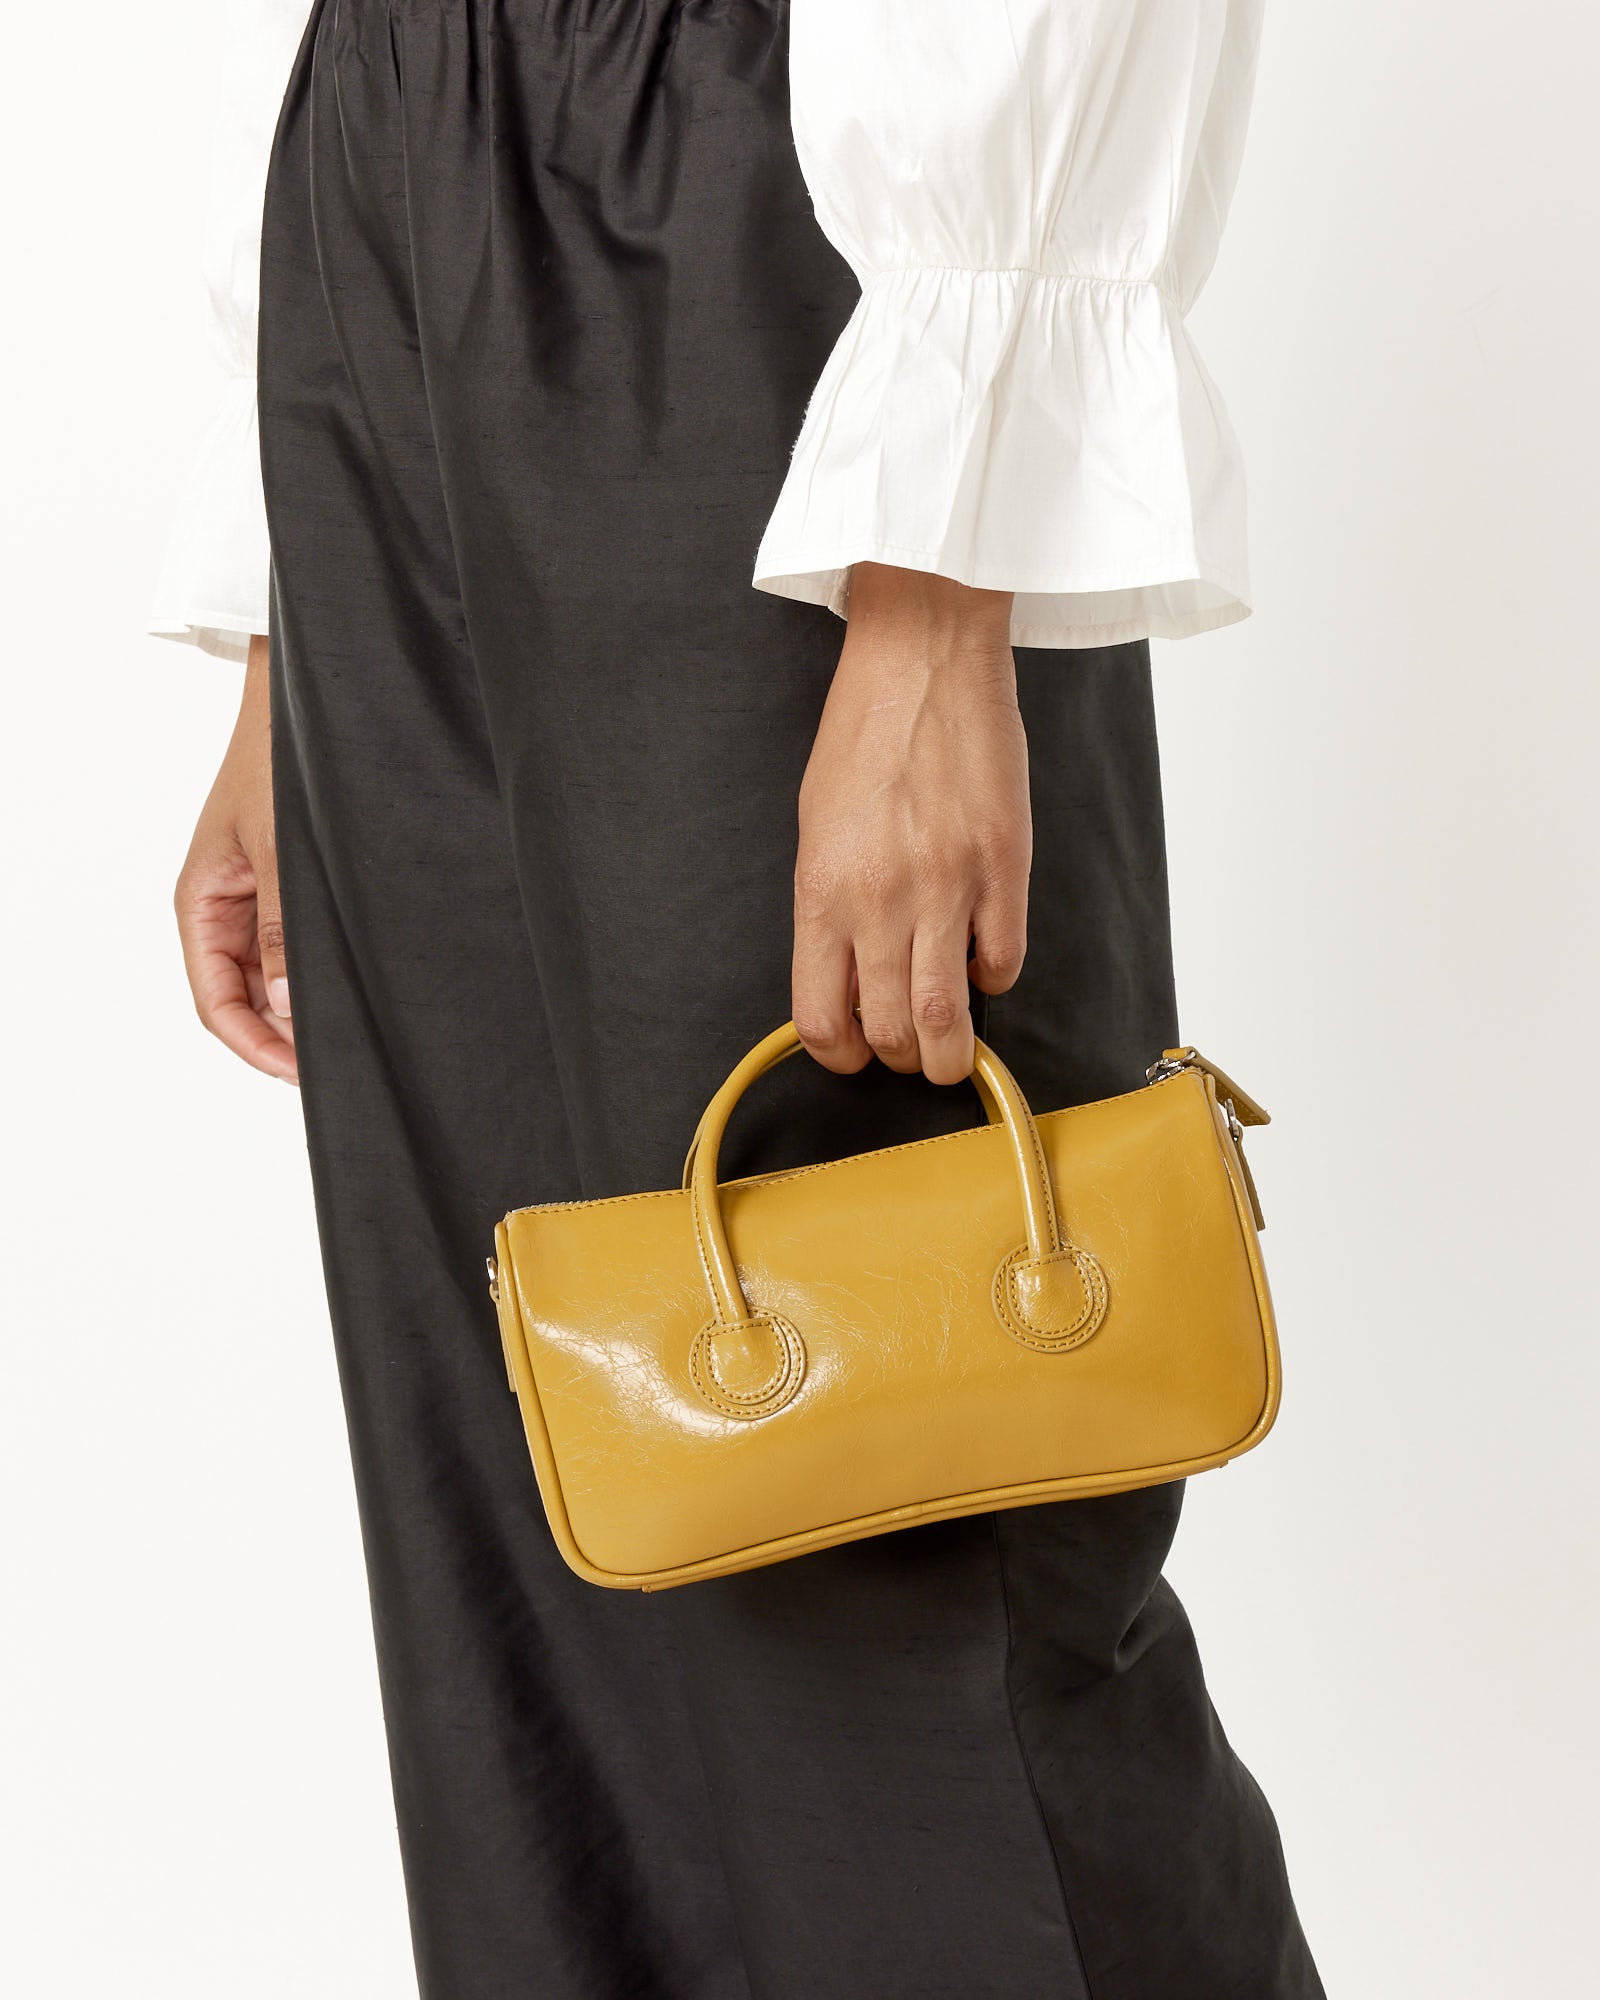 We'll discover the Piping Shoulder Bag Marge Sherwood that is